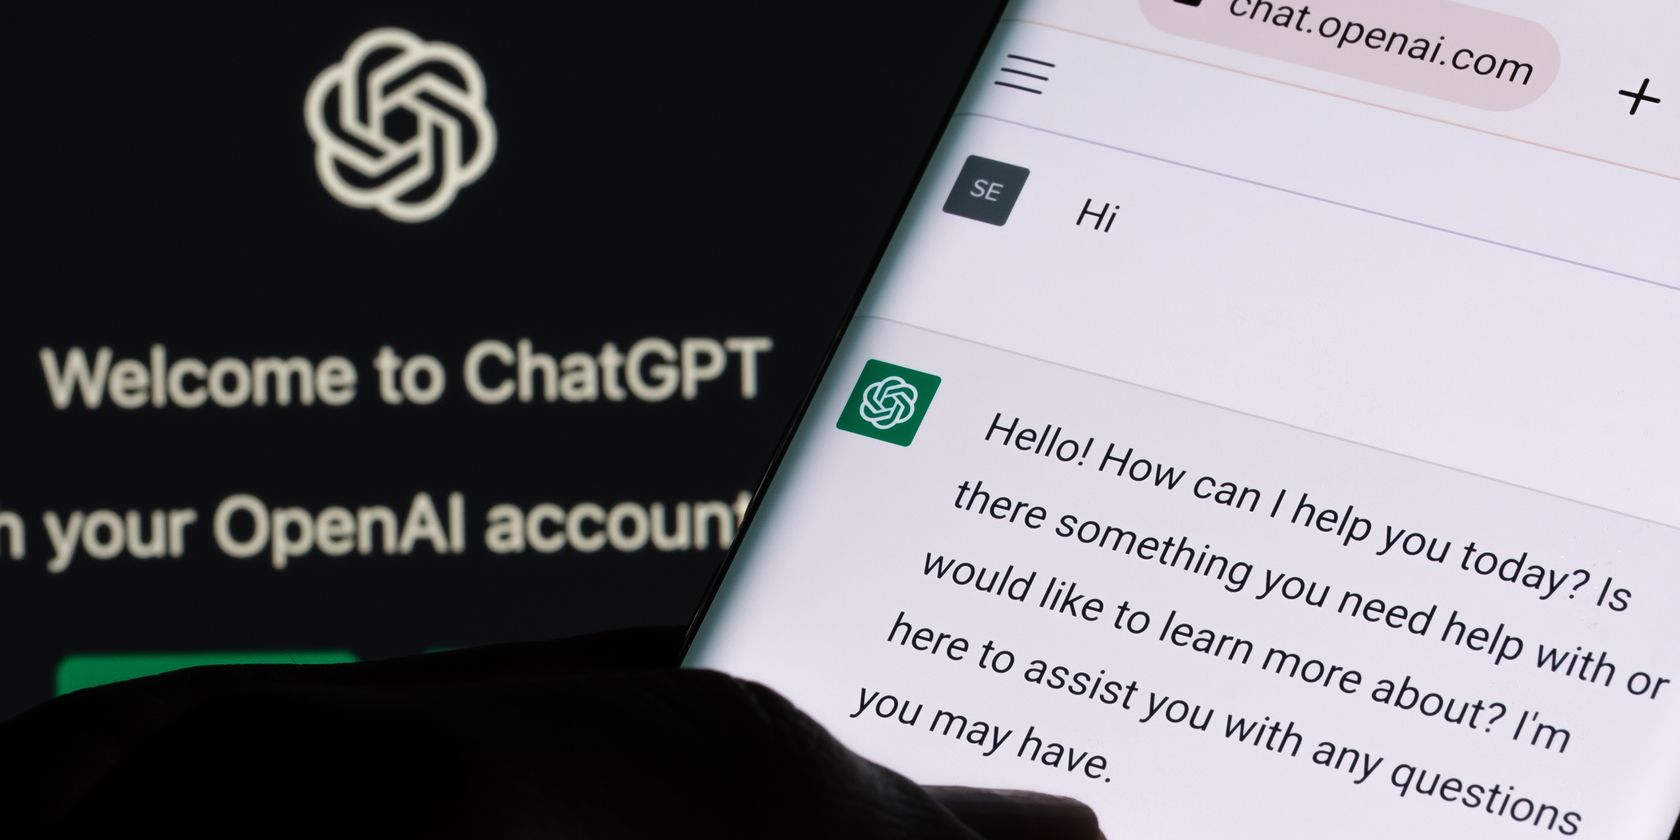 chatgpt logo and message on smartphone feature